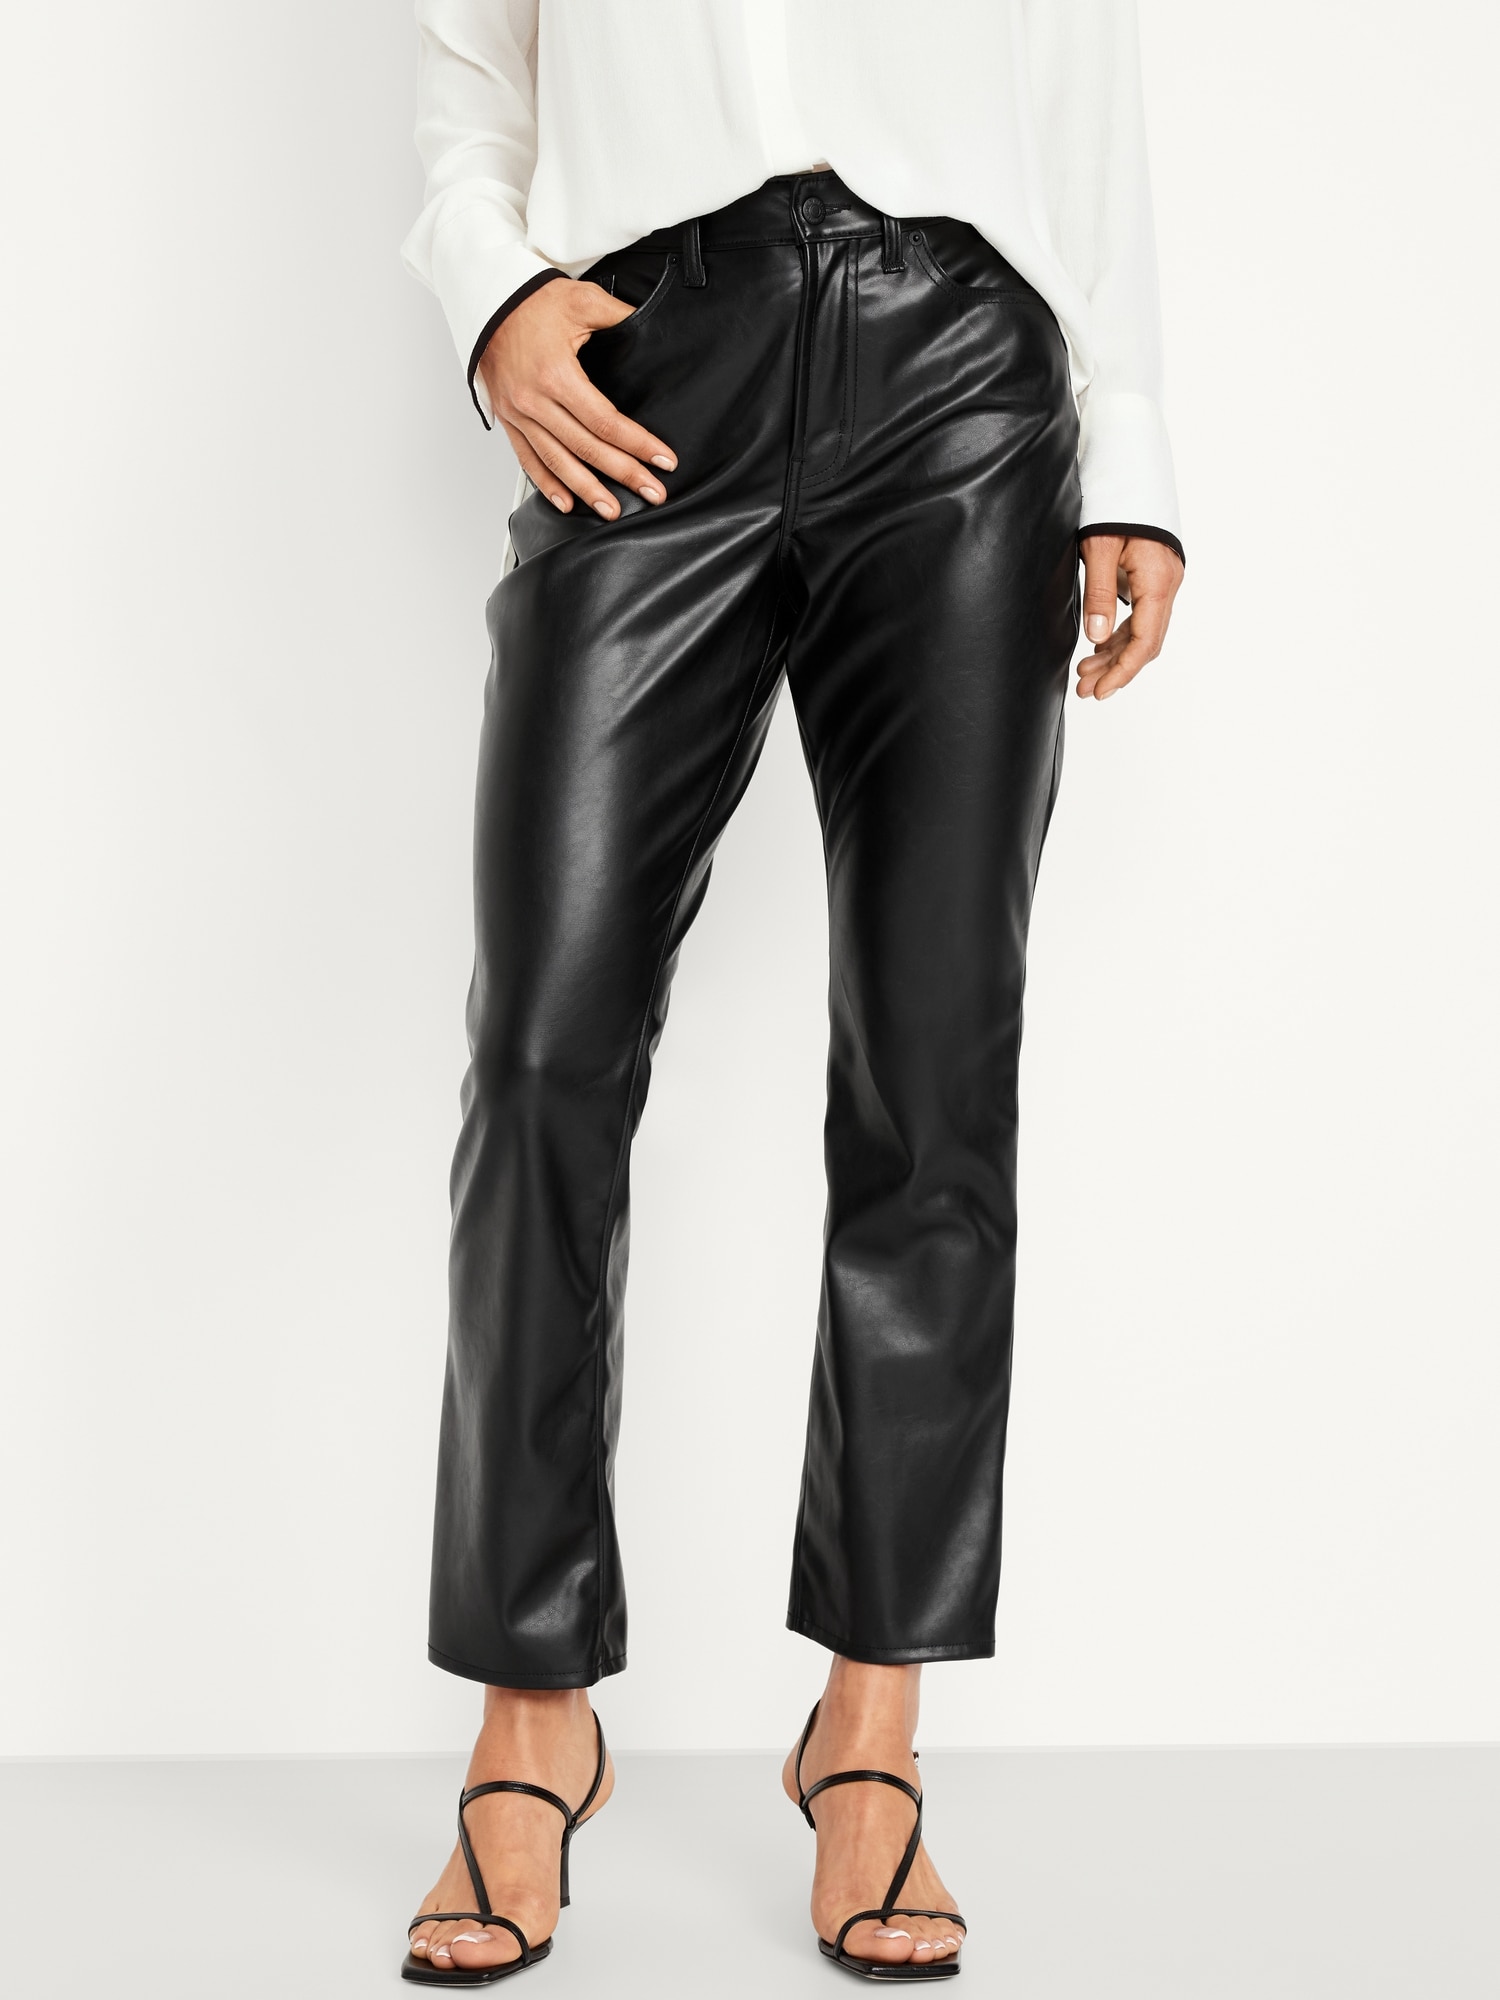 Petite Leather Pants For Women